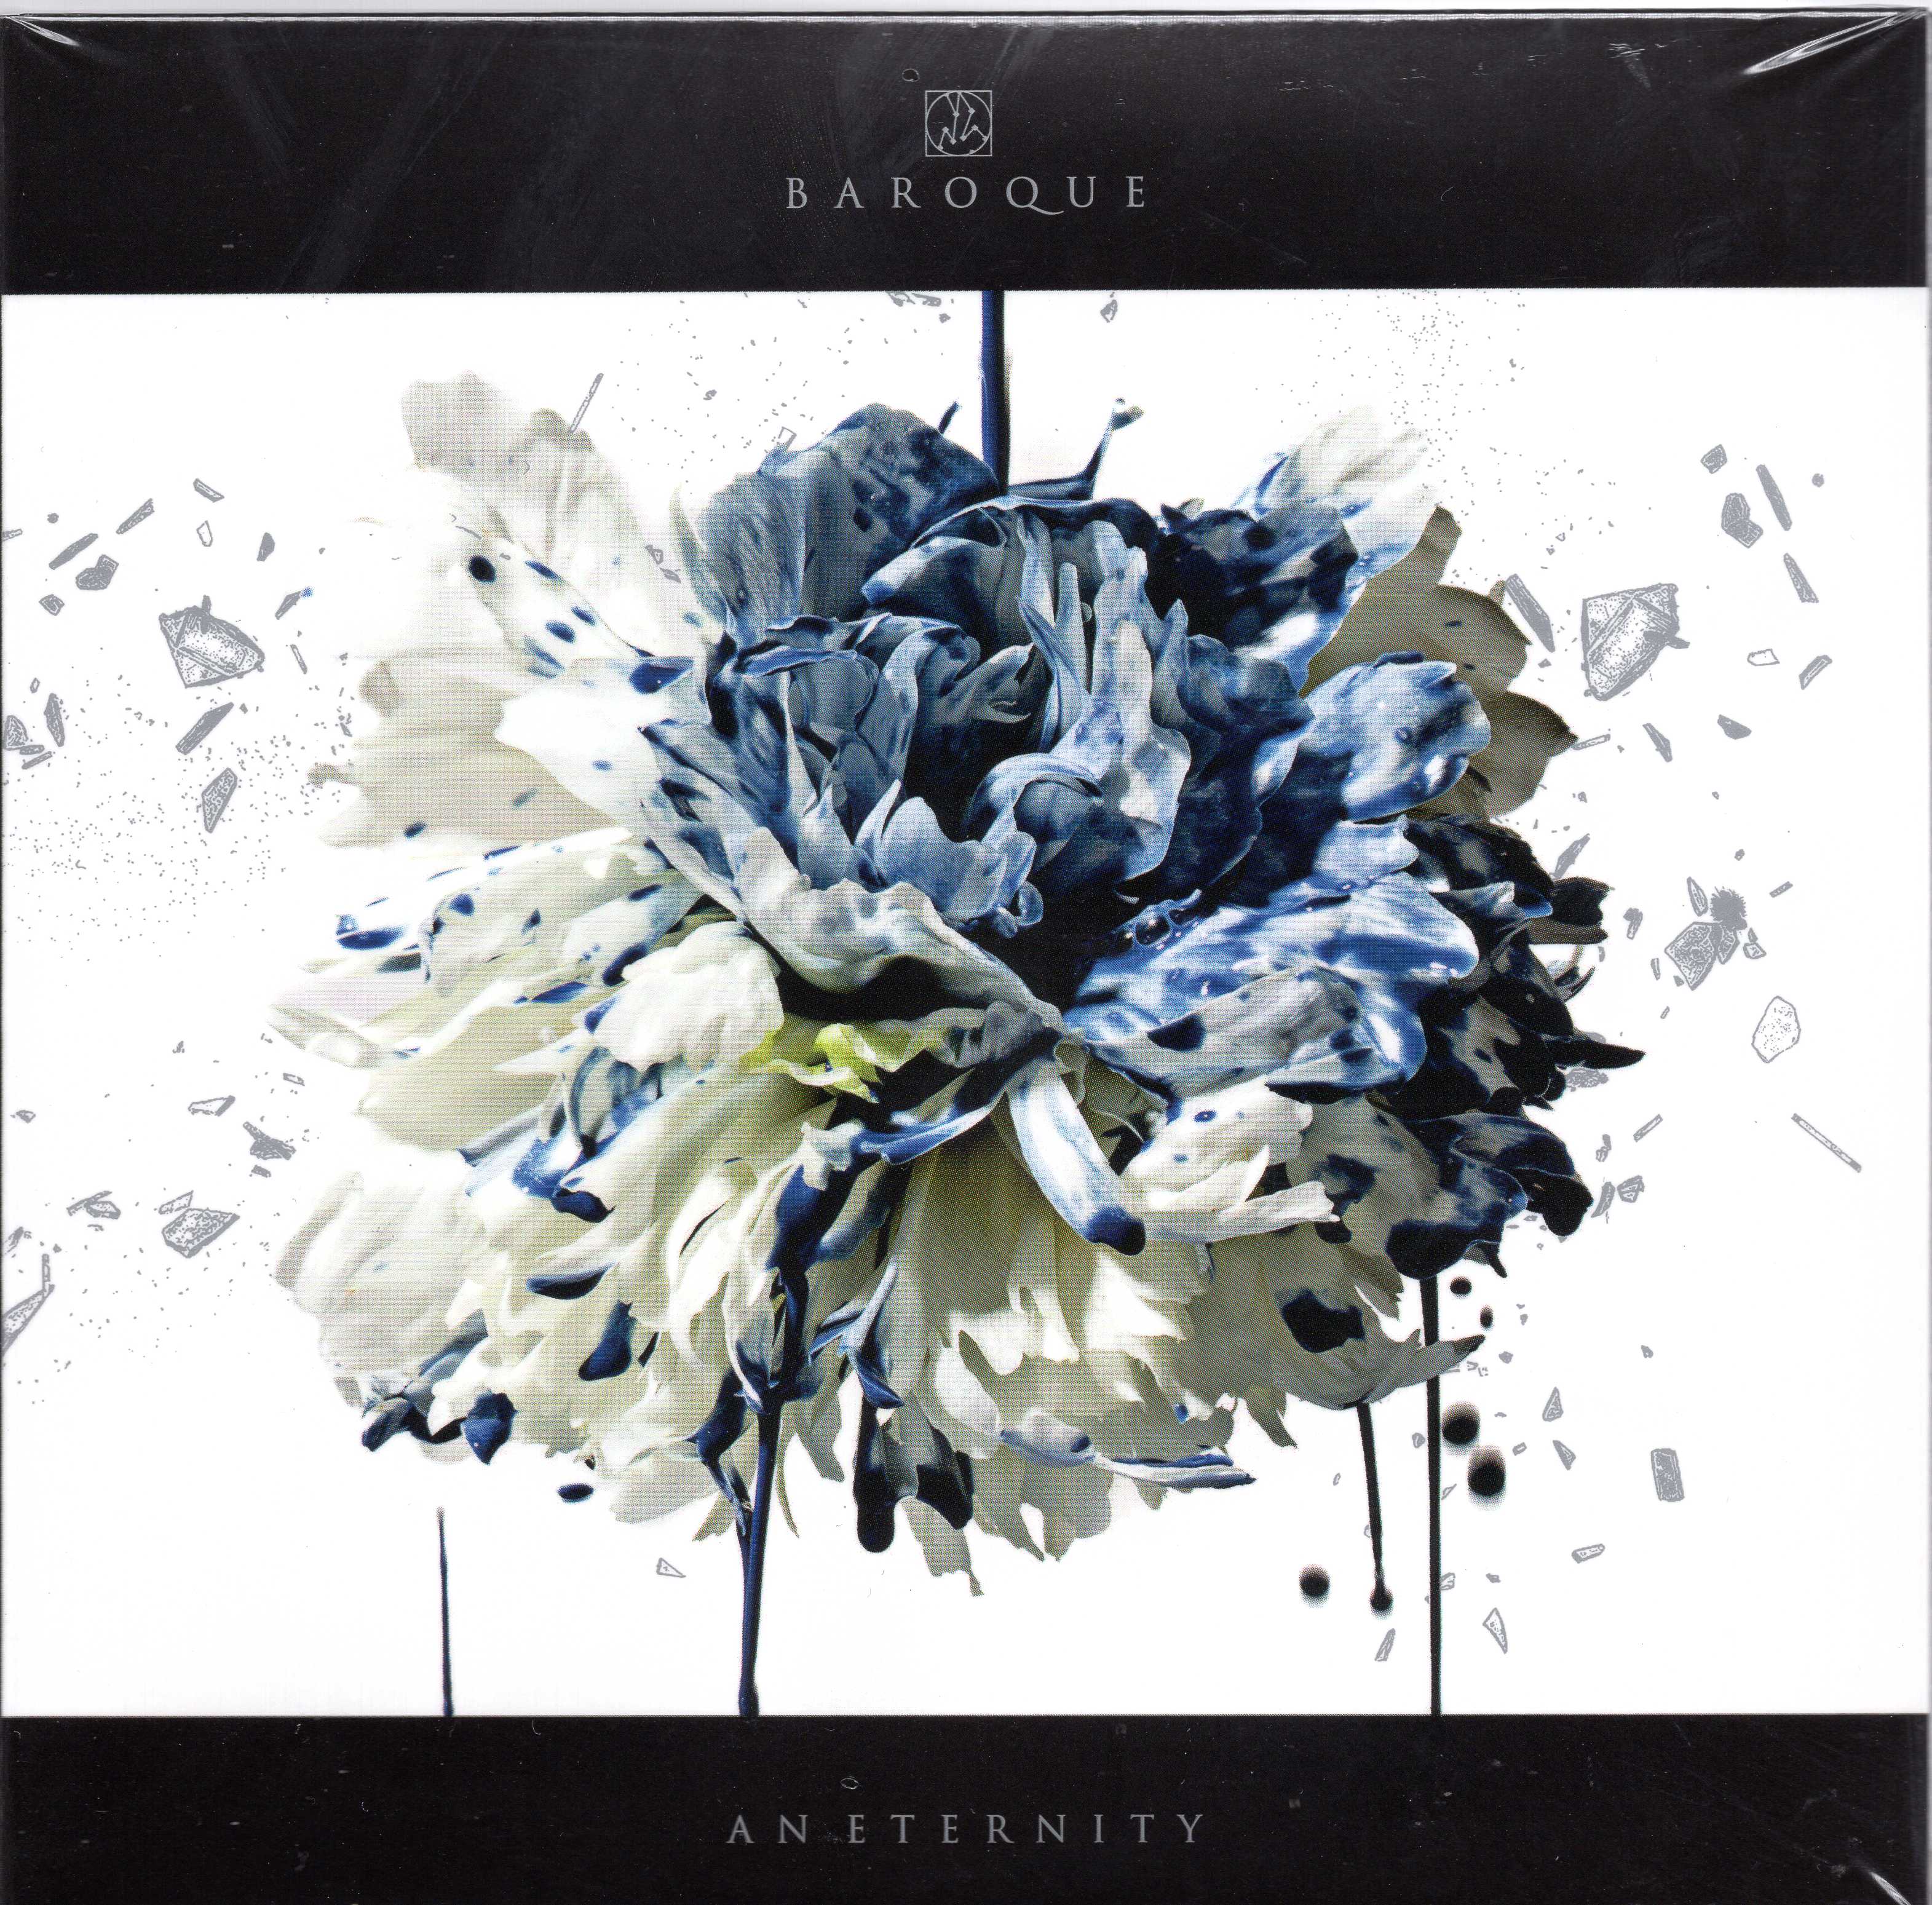 BAROQUE ( バロック )  の CD AN ETERNITY